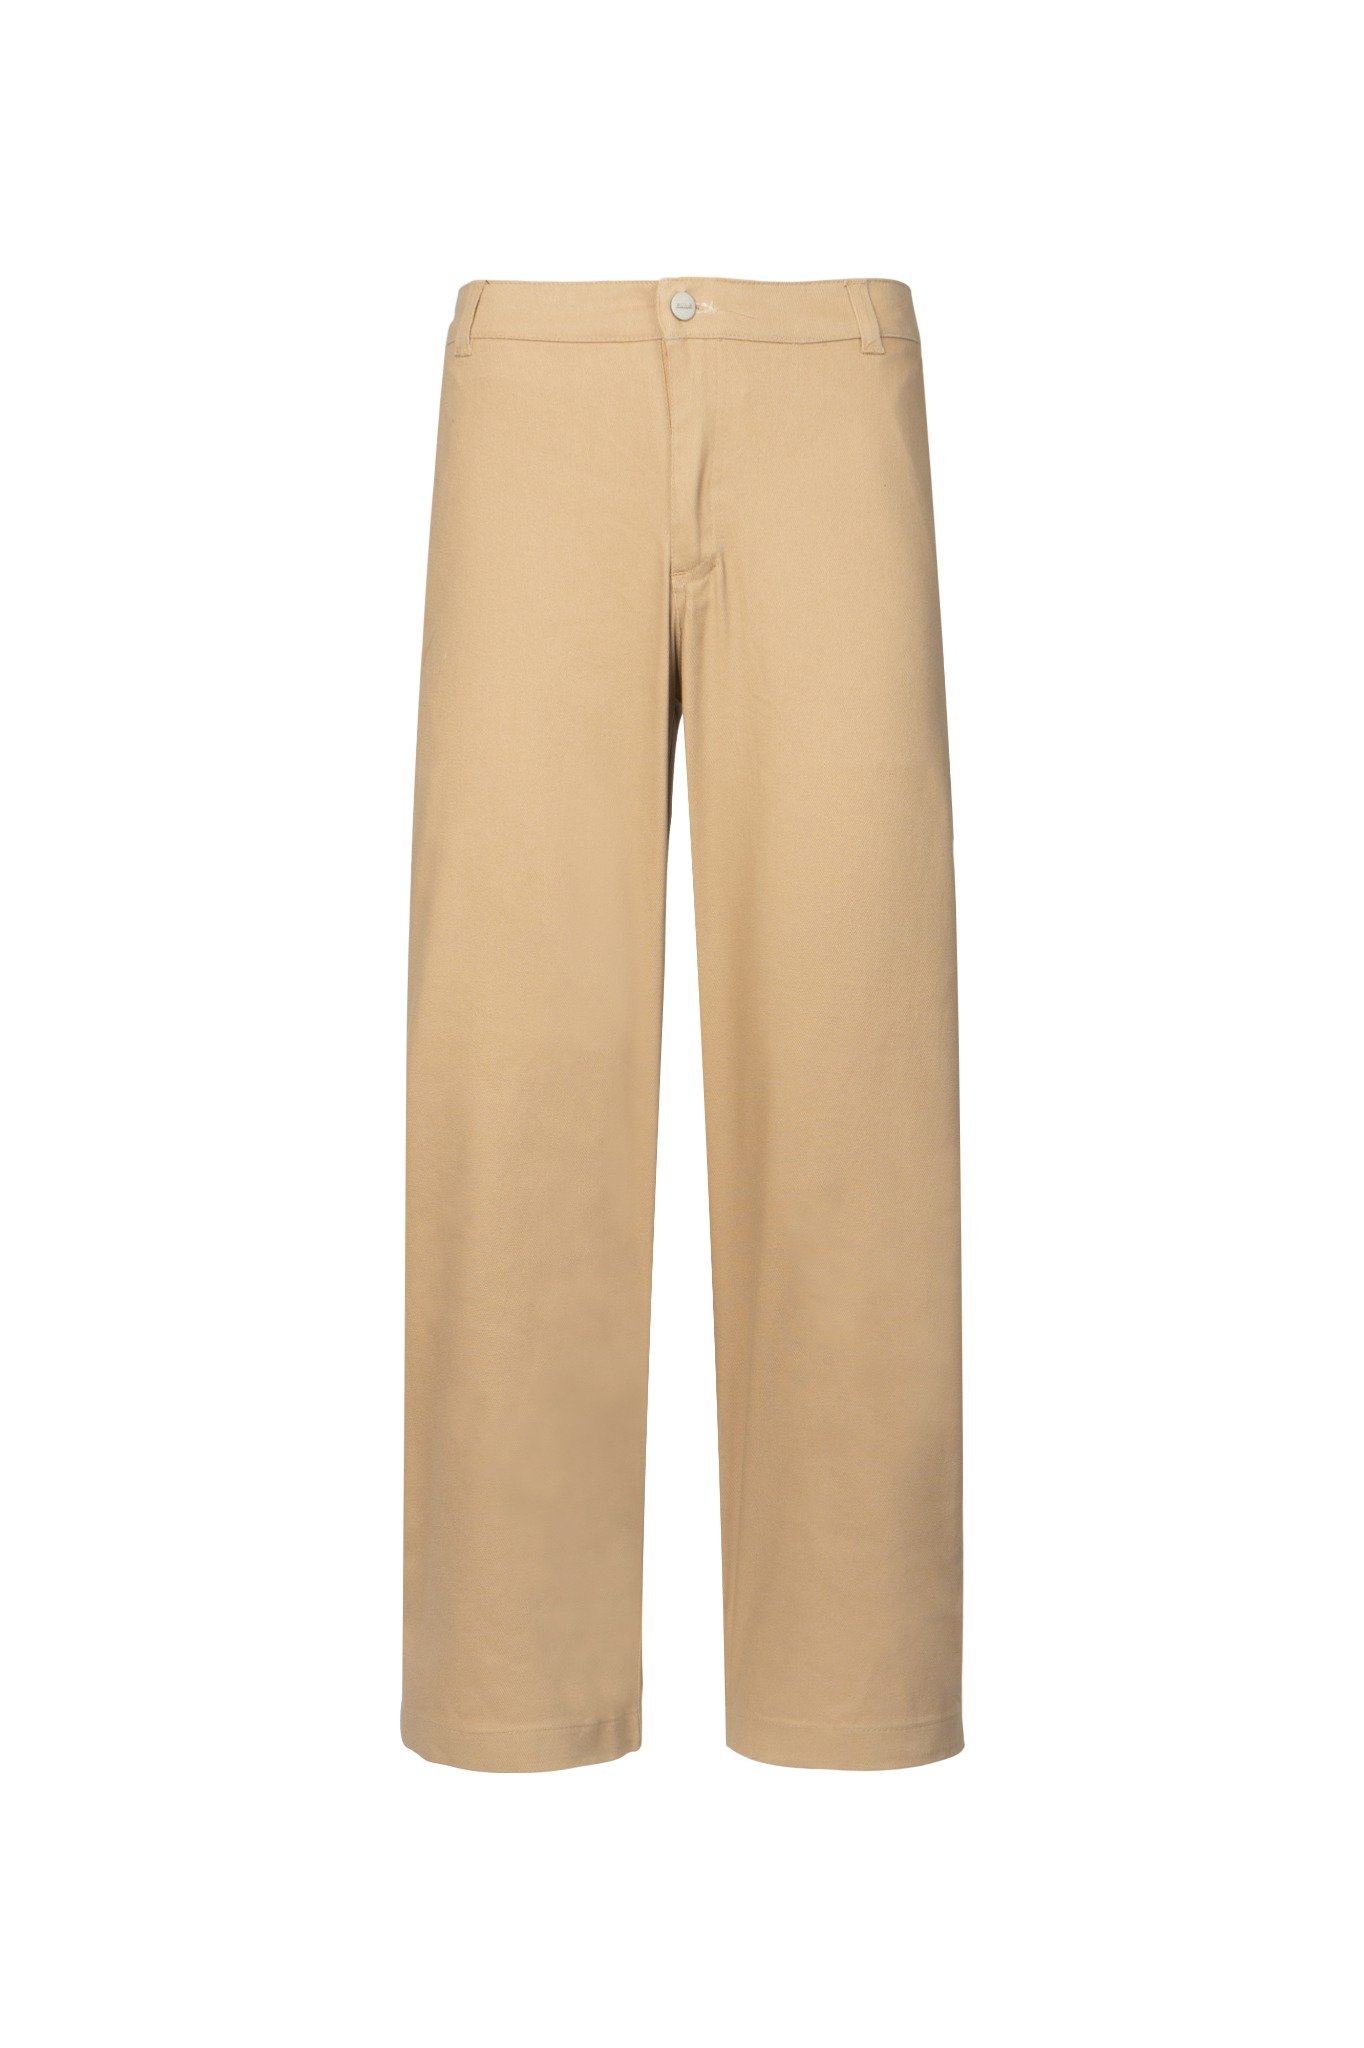  BEIGE RELAXED FIT CHINO PANTS 